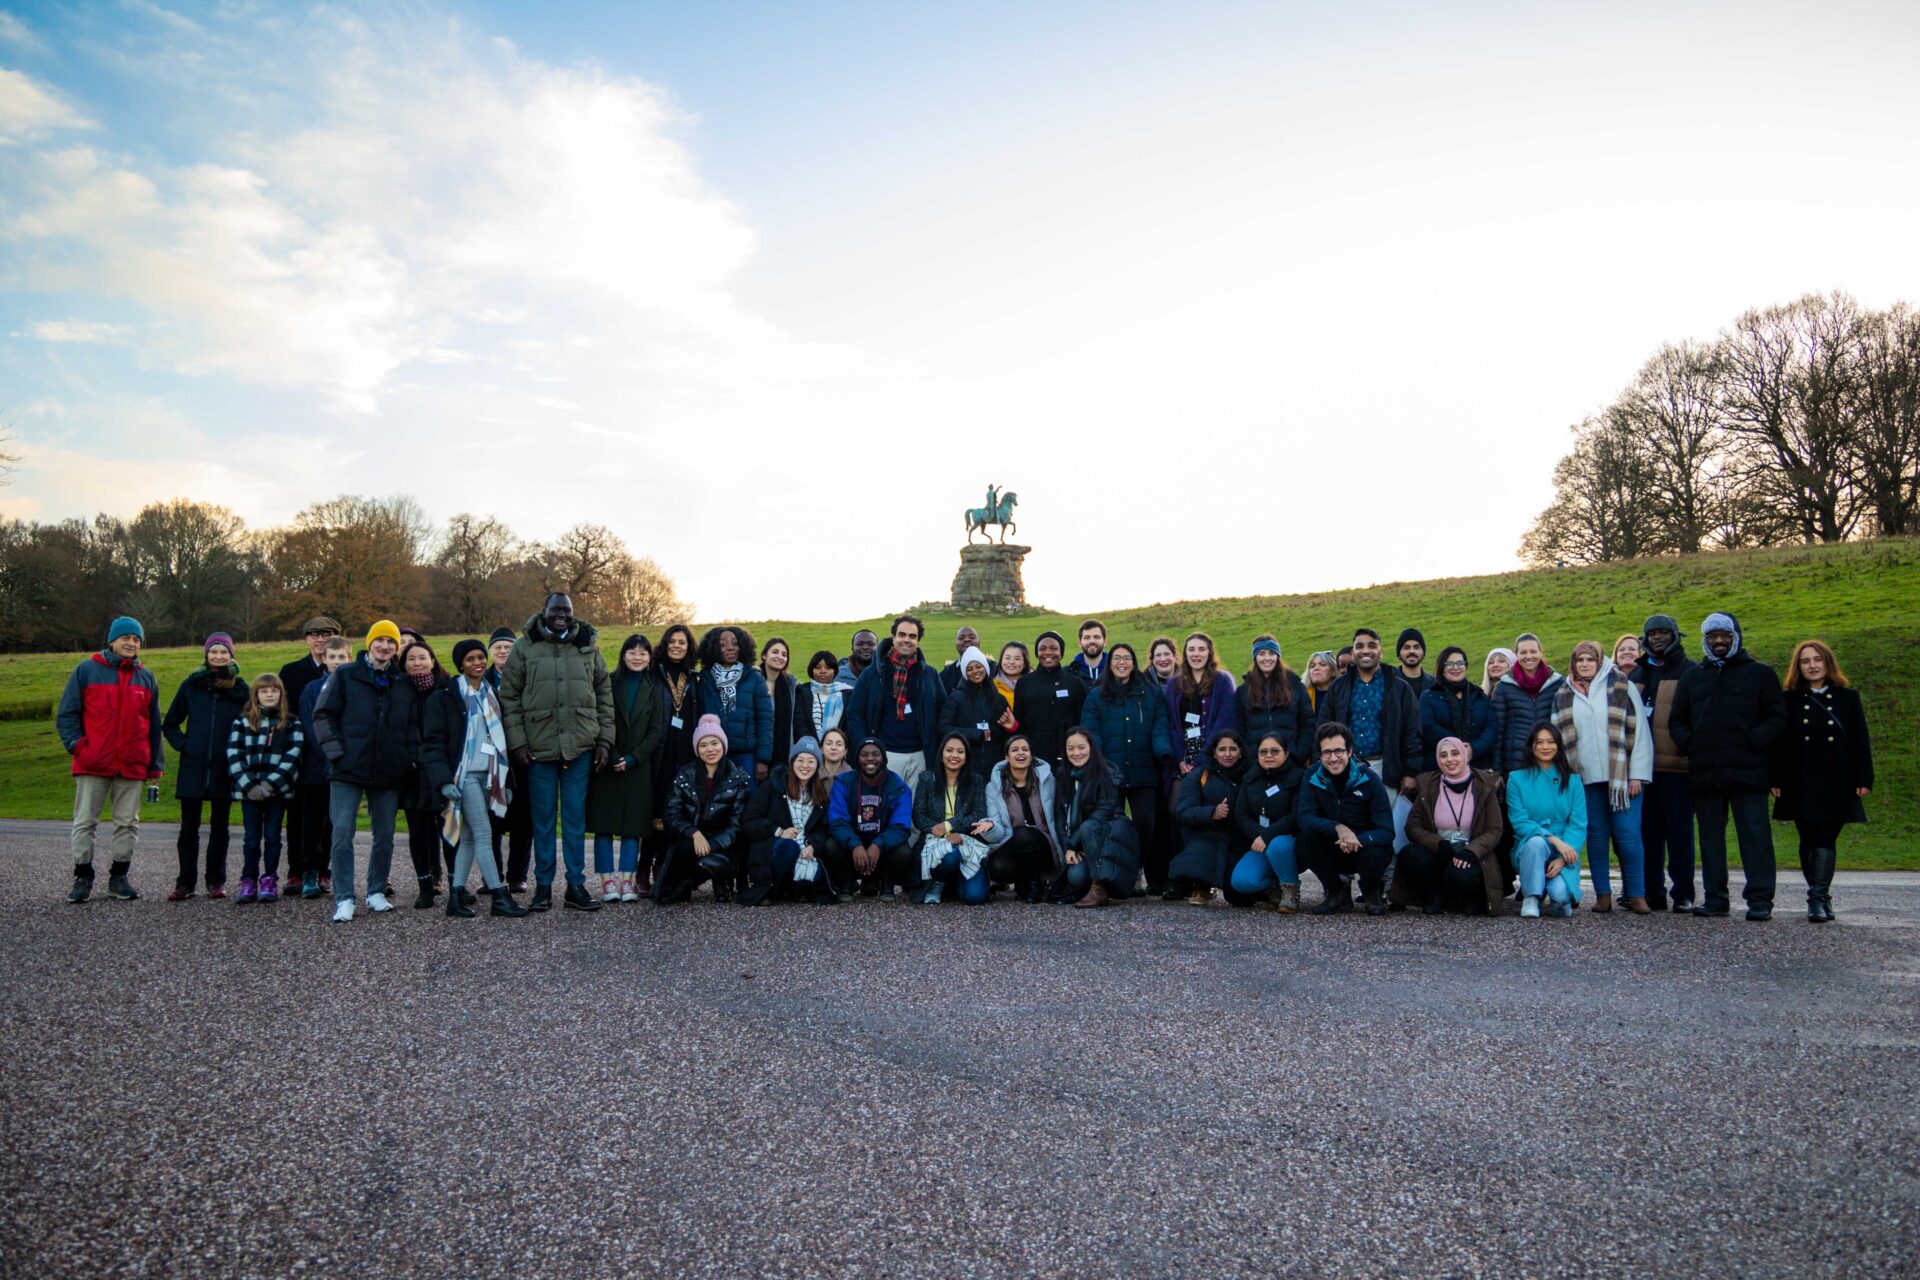 Participants at our Christmas conference posing for a photo in Windsor Great Park, with the Copper Horse statue behind them, as the sun is setting.